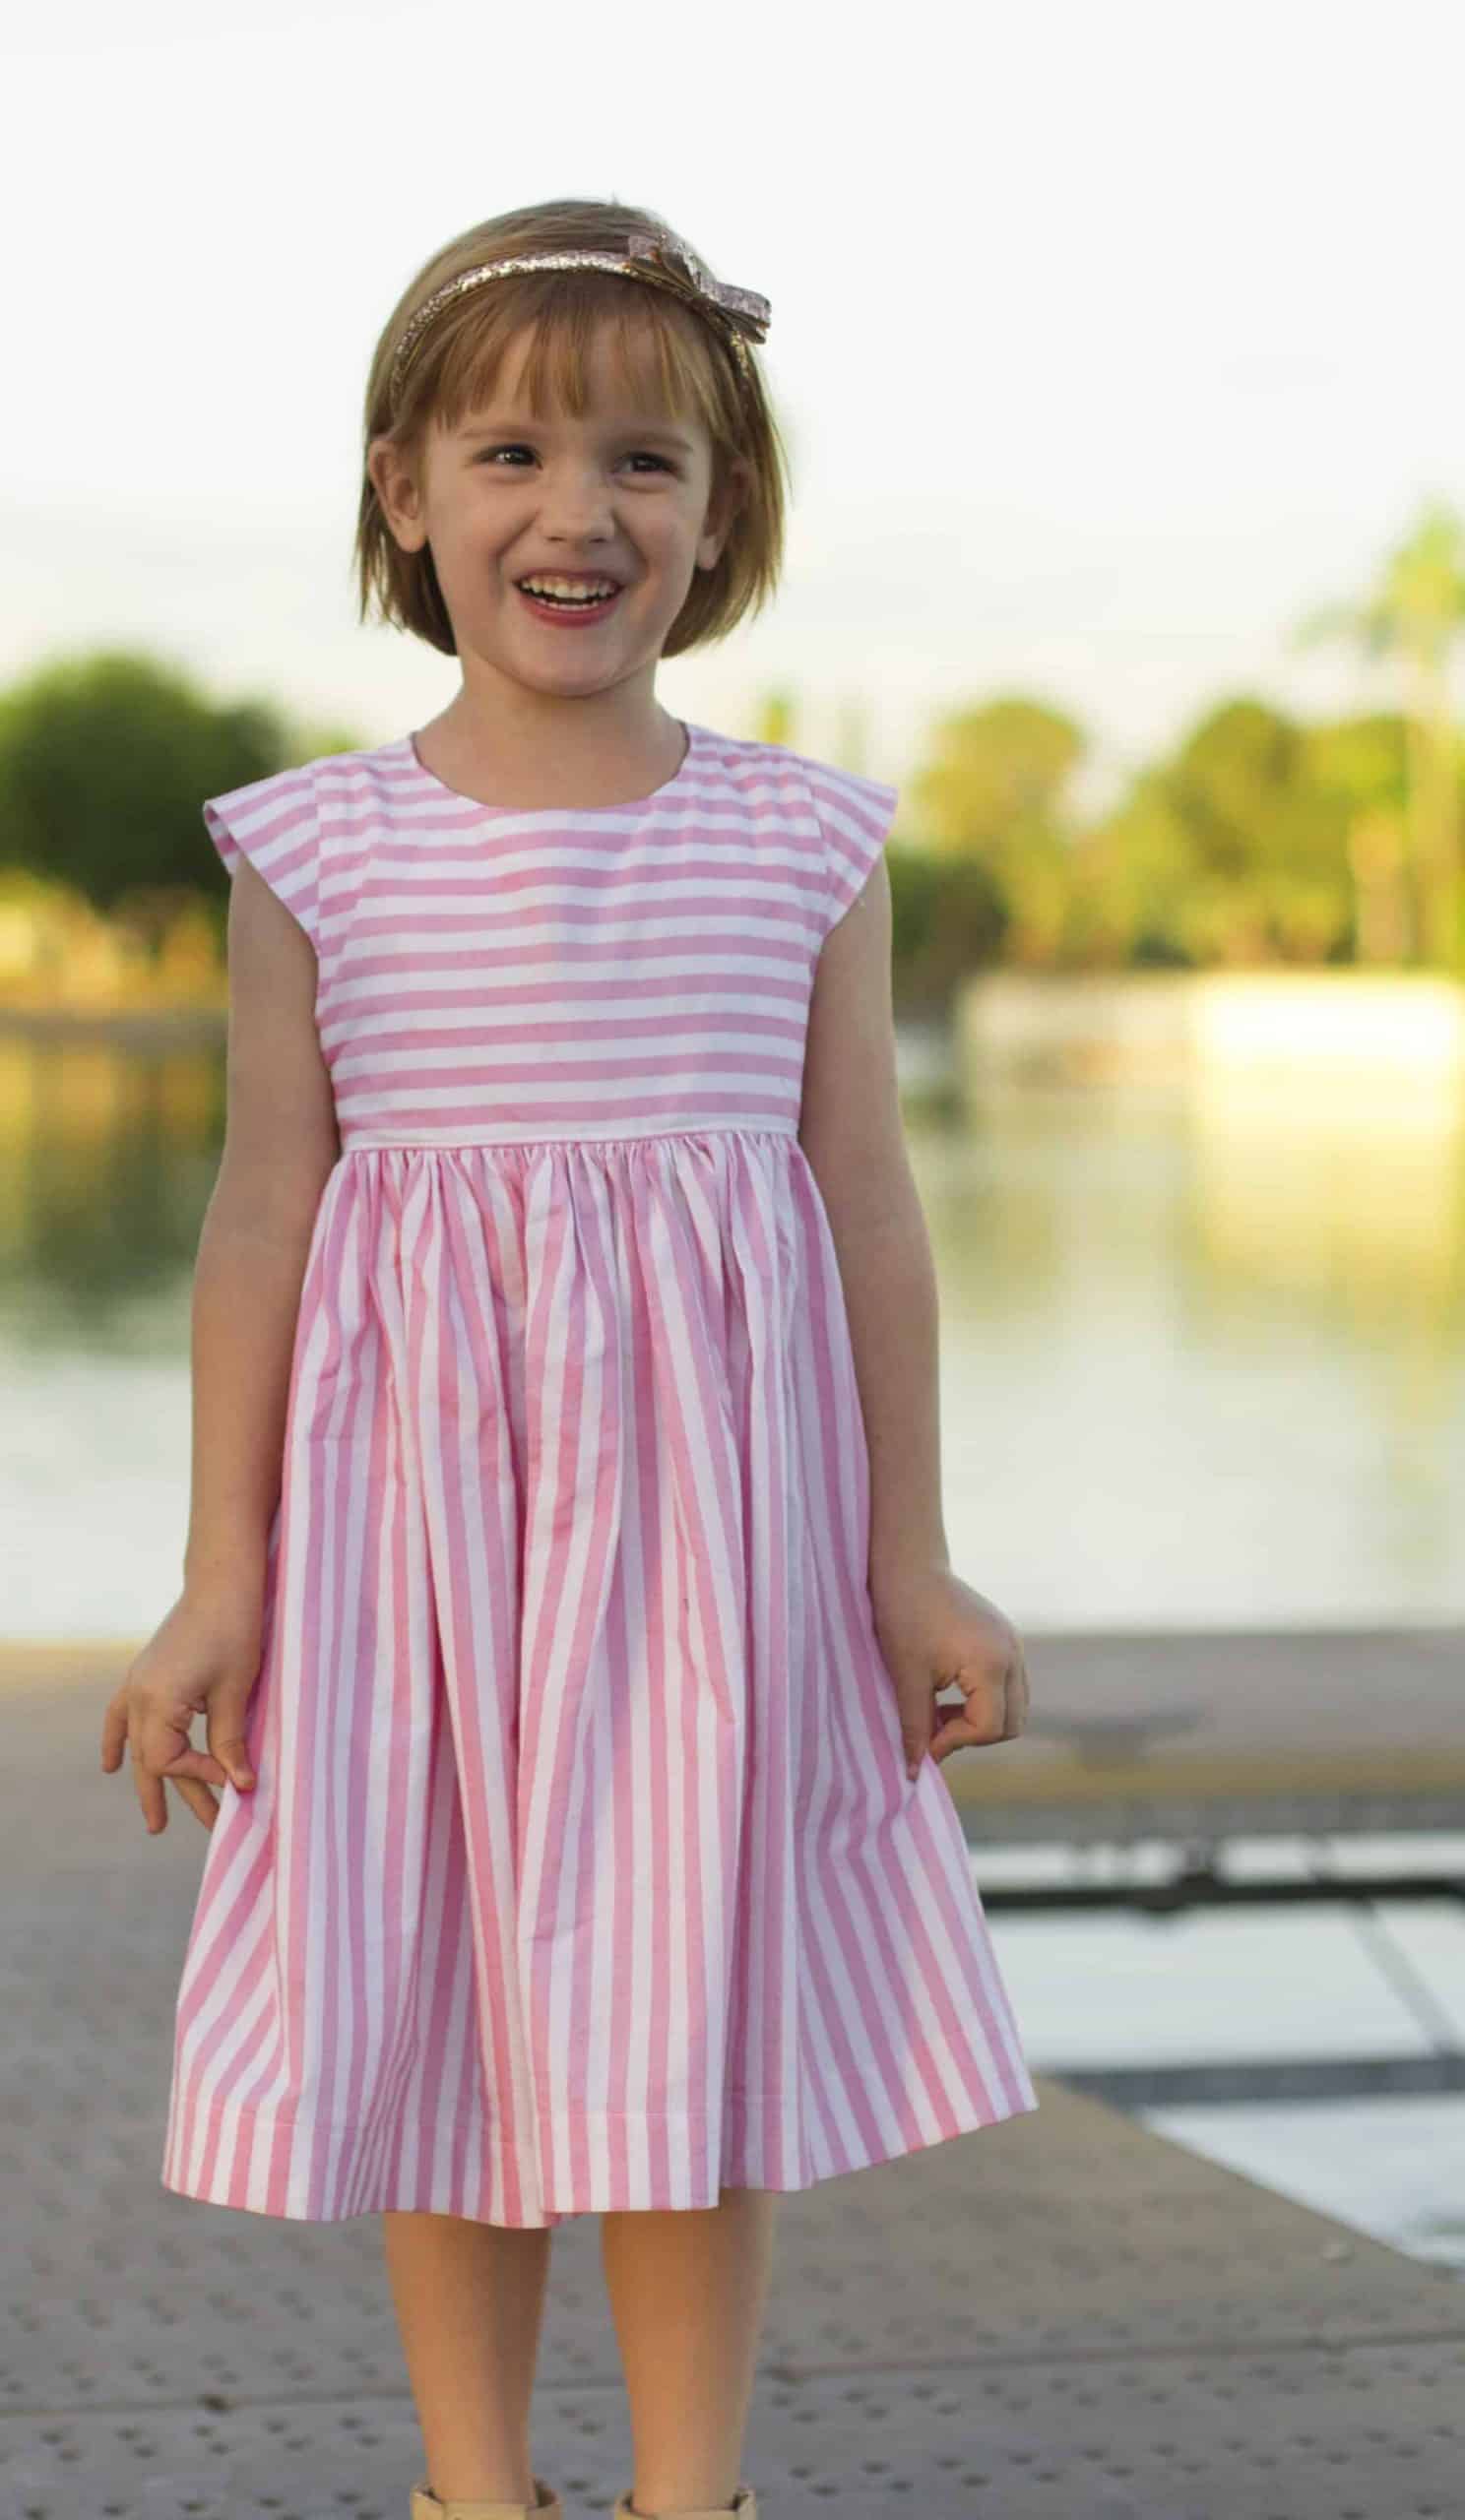 12 Quick & EASY Dress Patterns for Women {FREE}